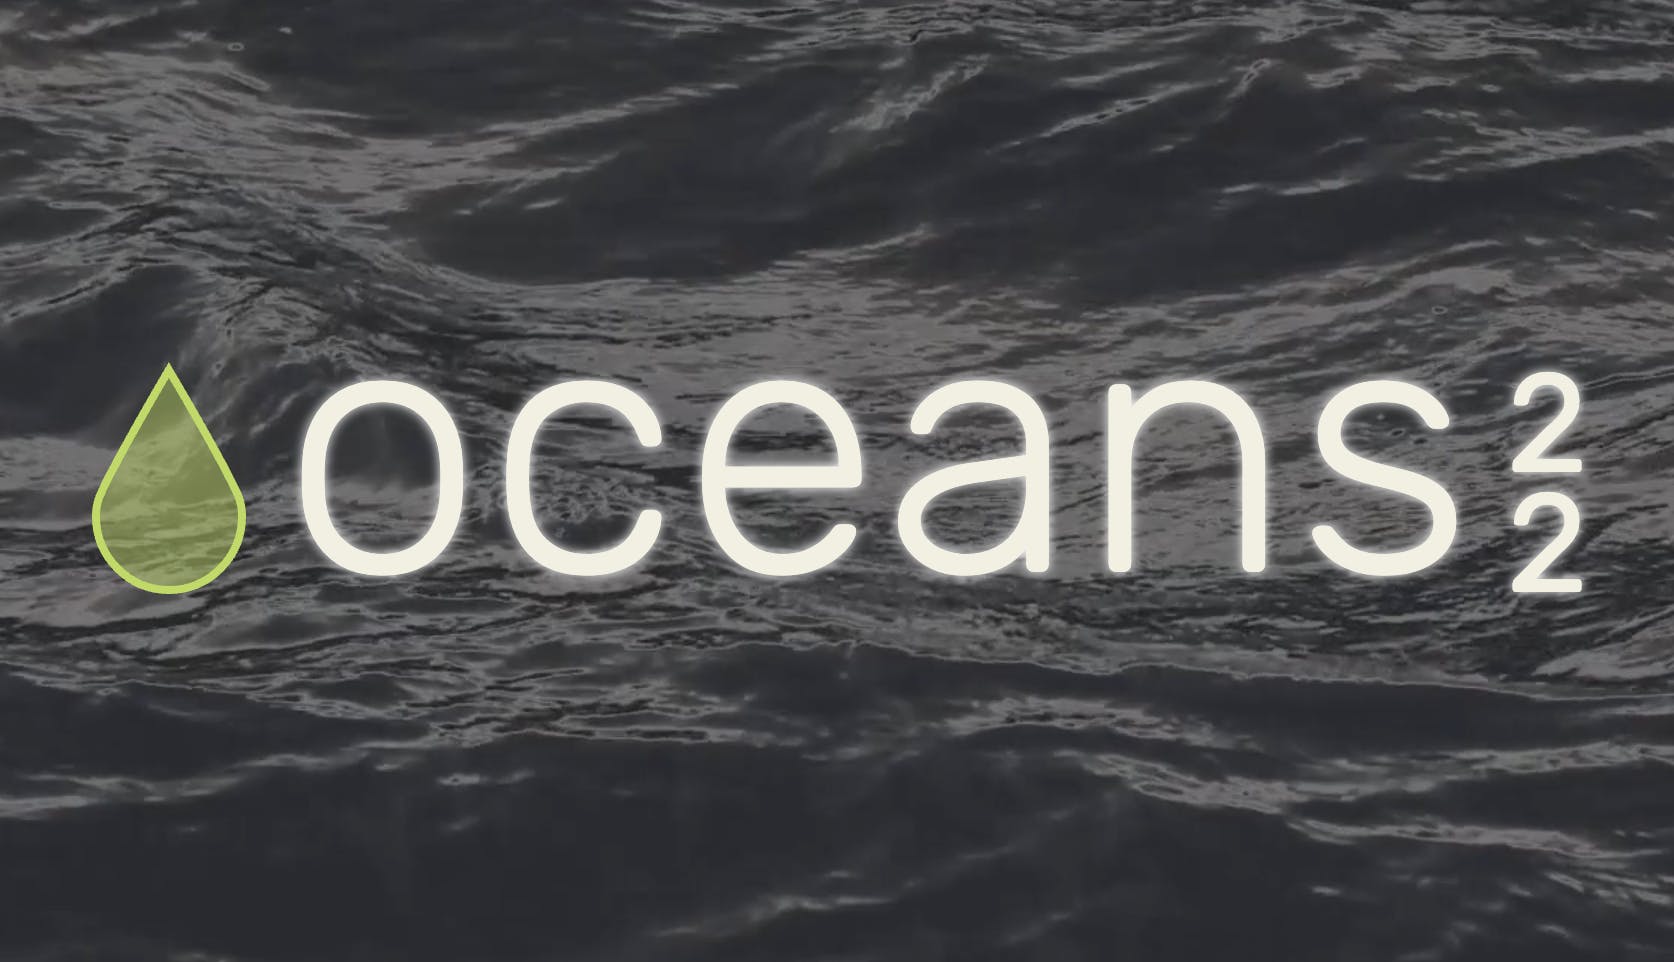 Europe Jacques Delors attended the Ocean 22 Conference in San Francisco